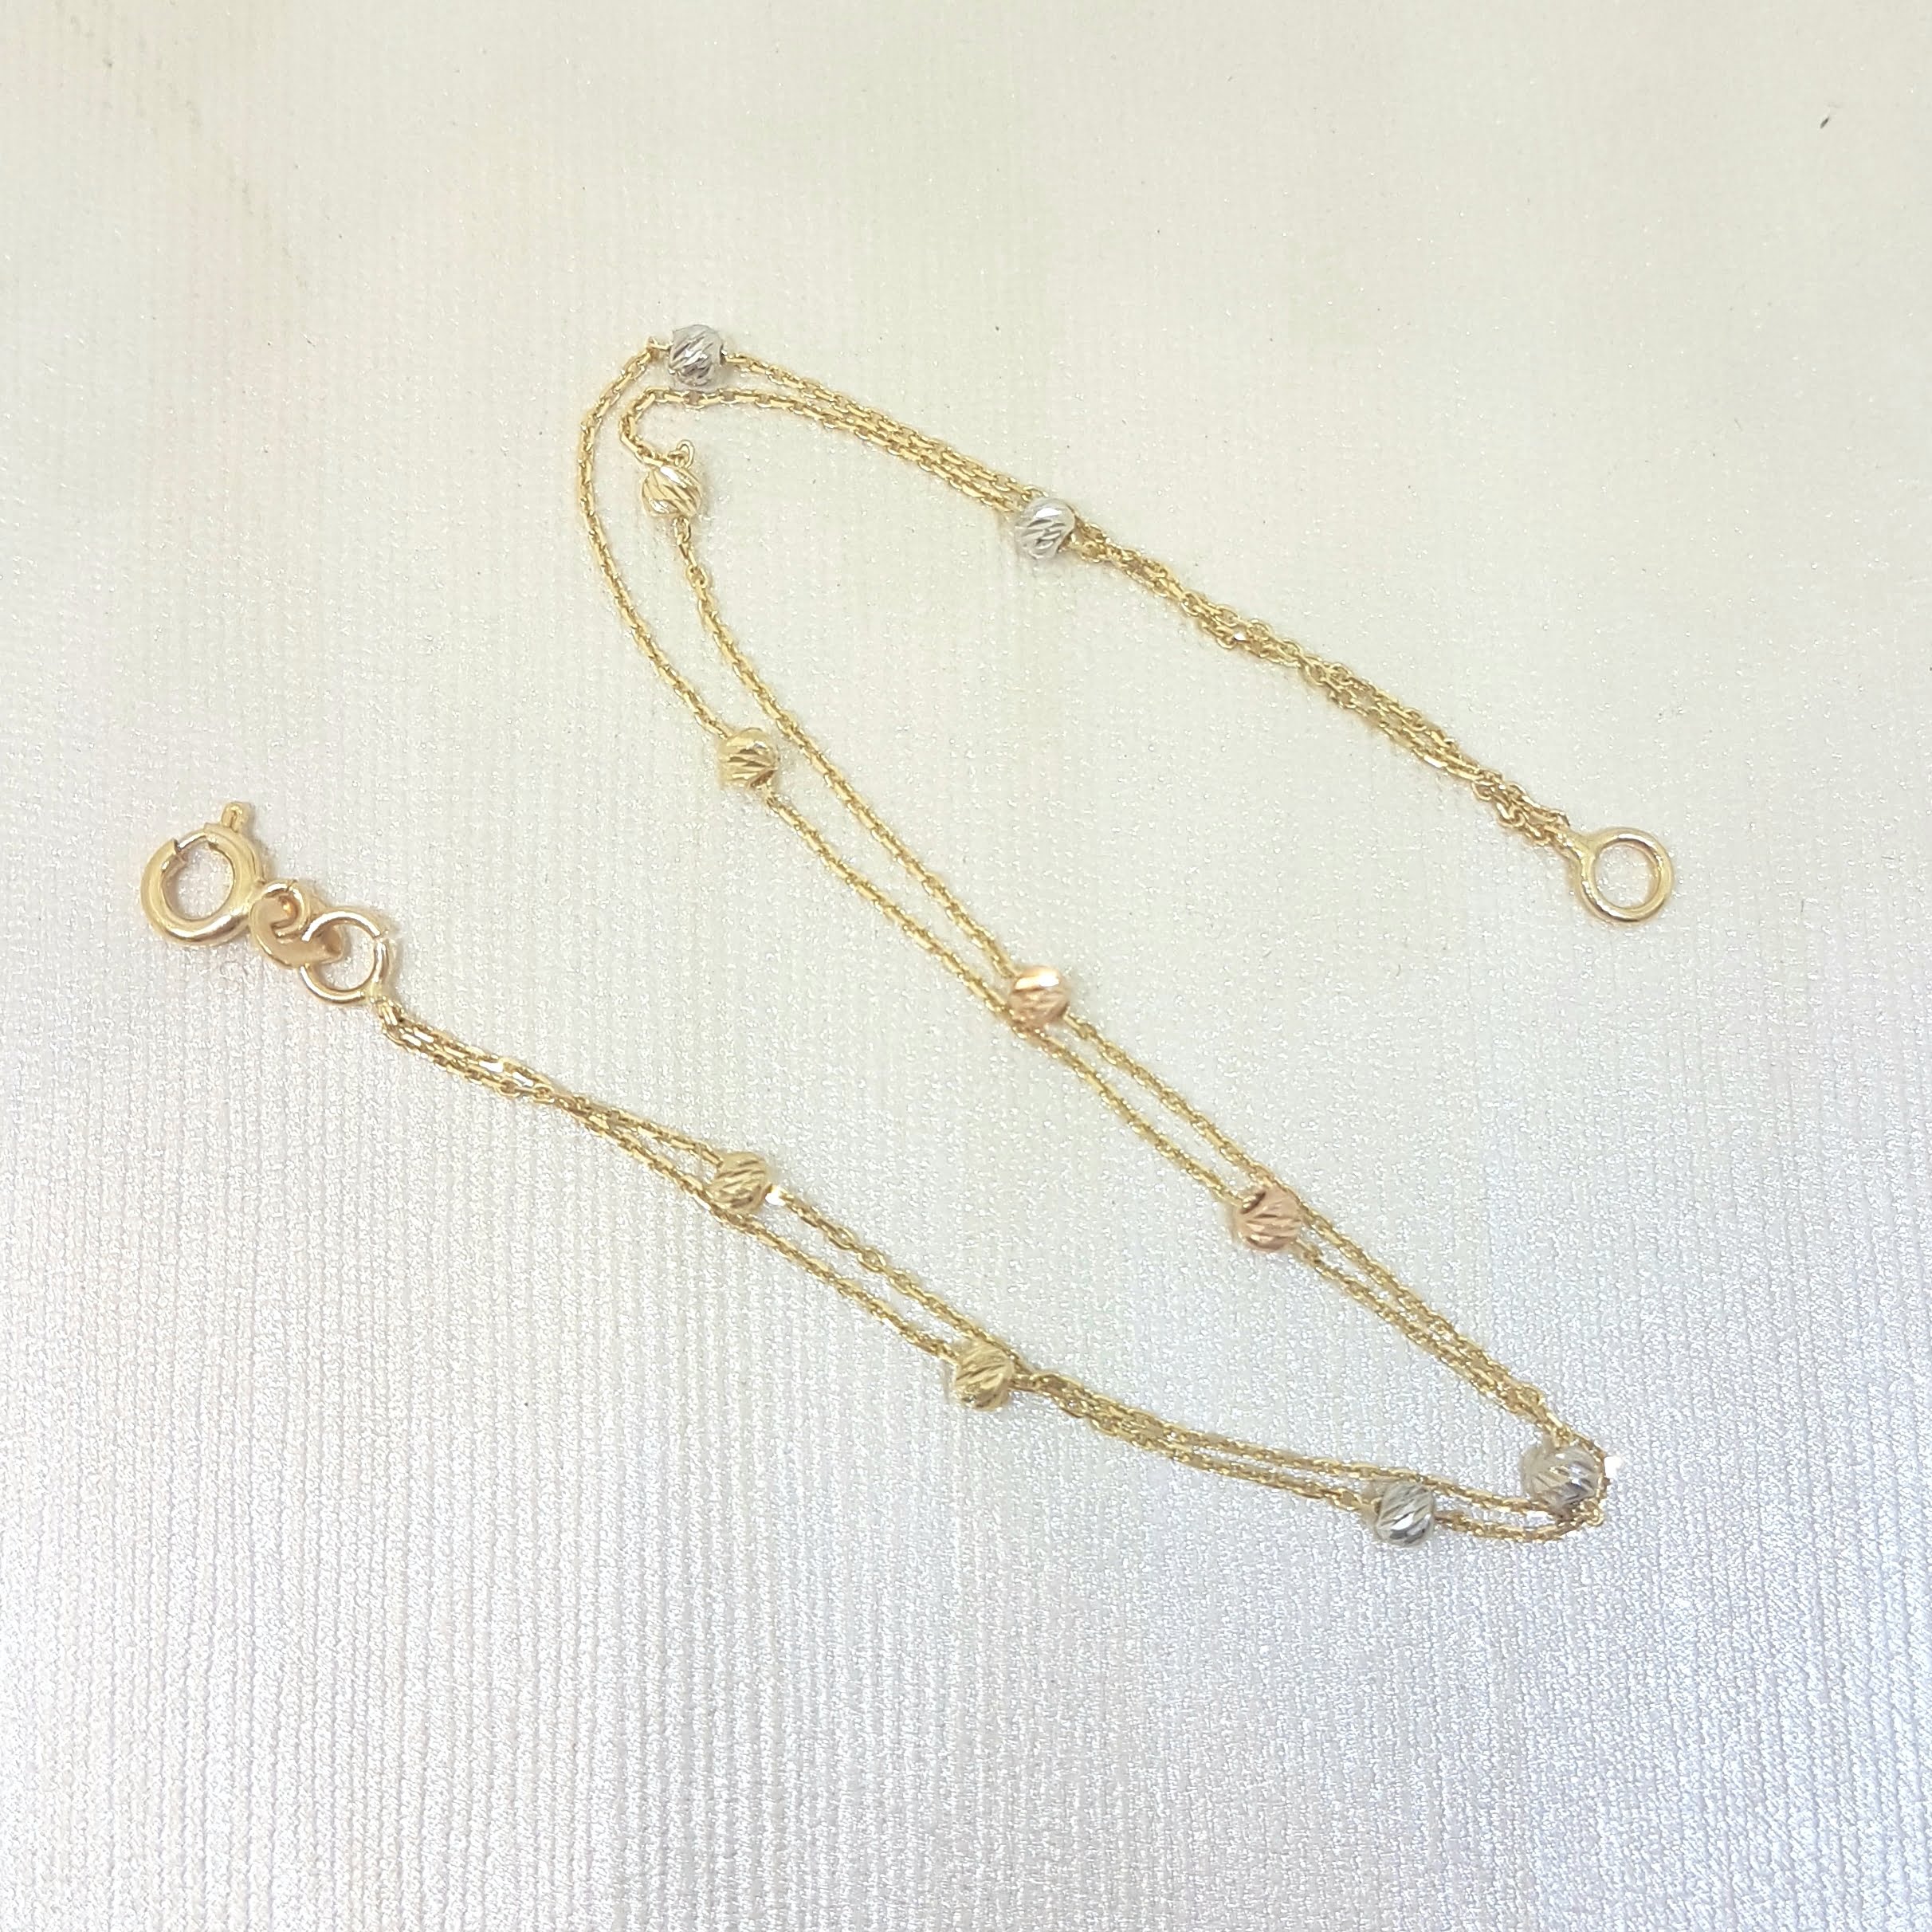 Two Rows Chain Bracelet with Italian Balls Charm Dainty Delicate Trendy Tiny Cute best birthday gift Women Jewelry girlfriend 14K Real Solid Gold 